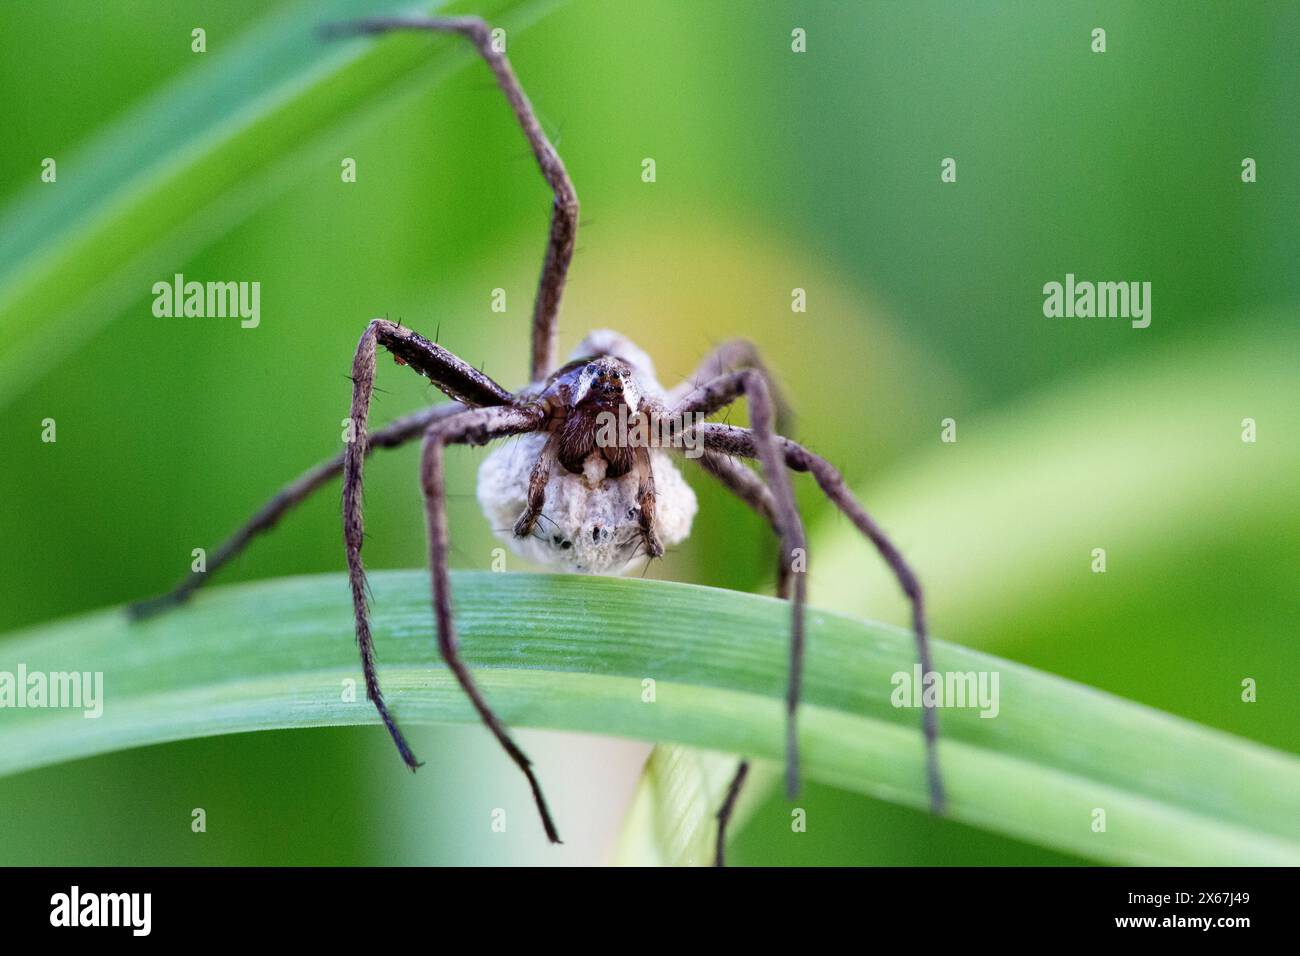 Frontal view of a list spider carrying a cocoon Stock Photo